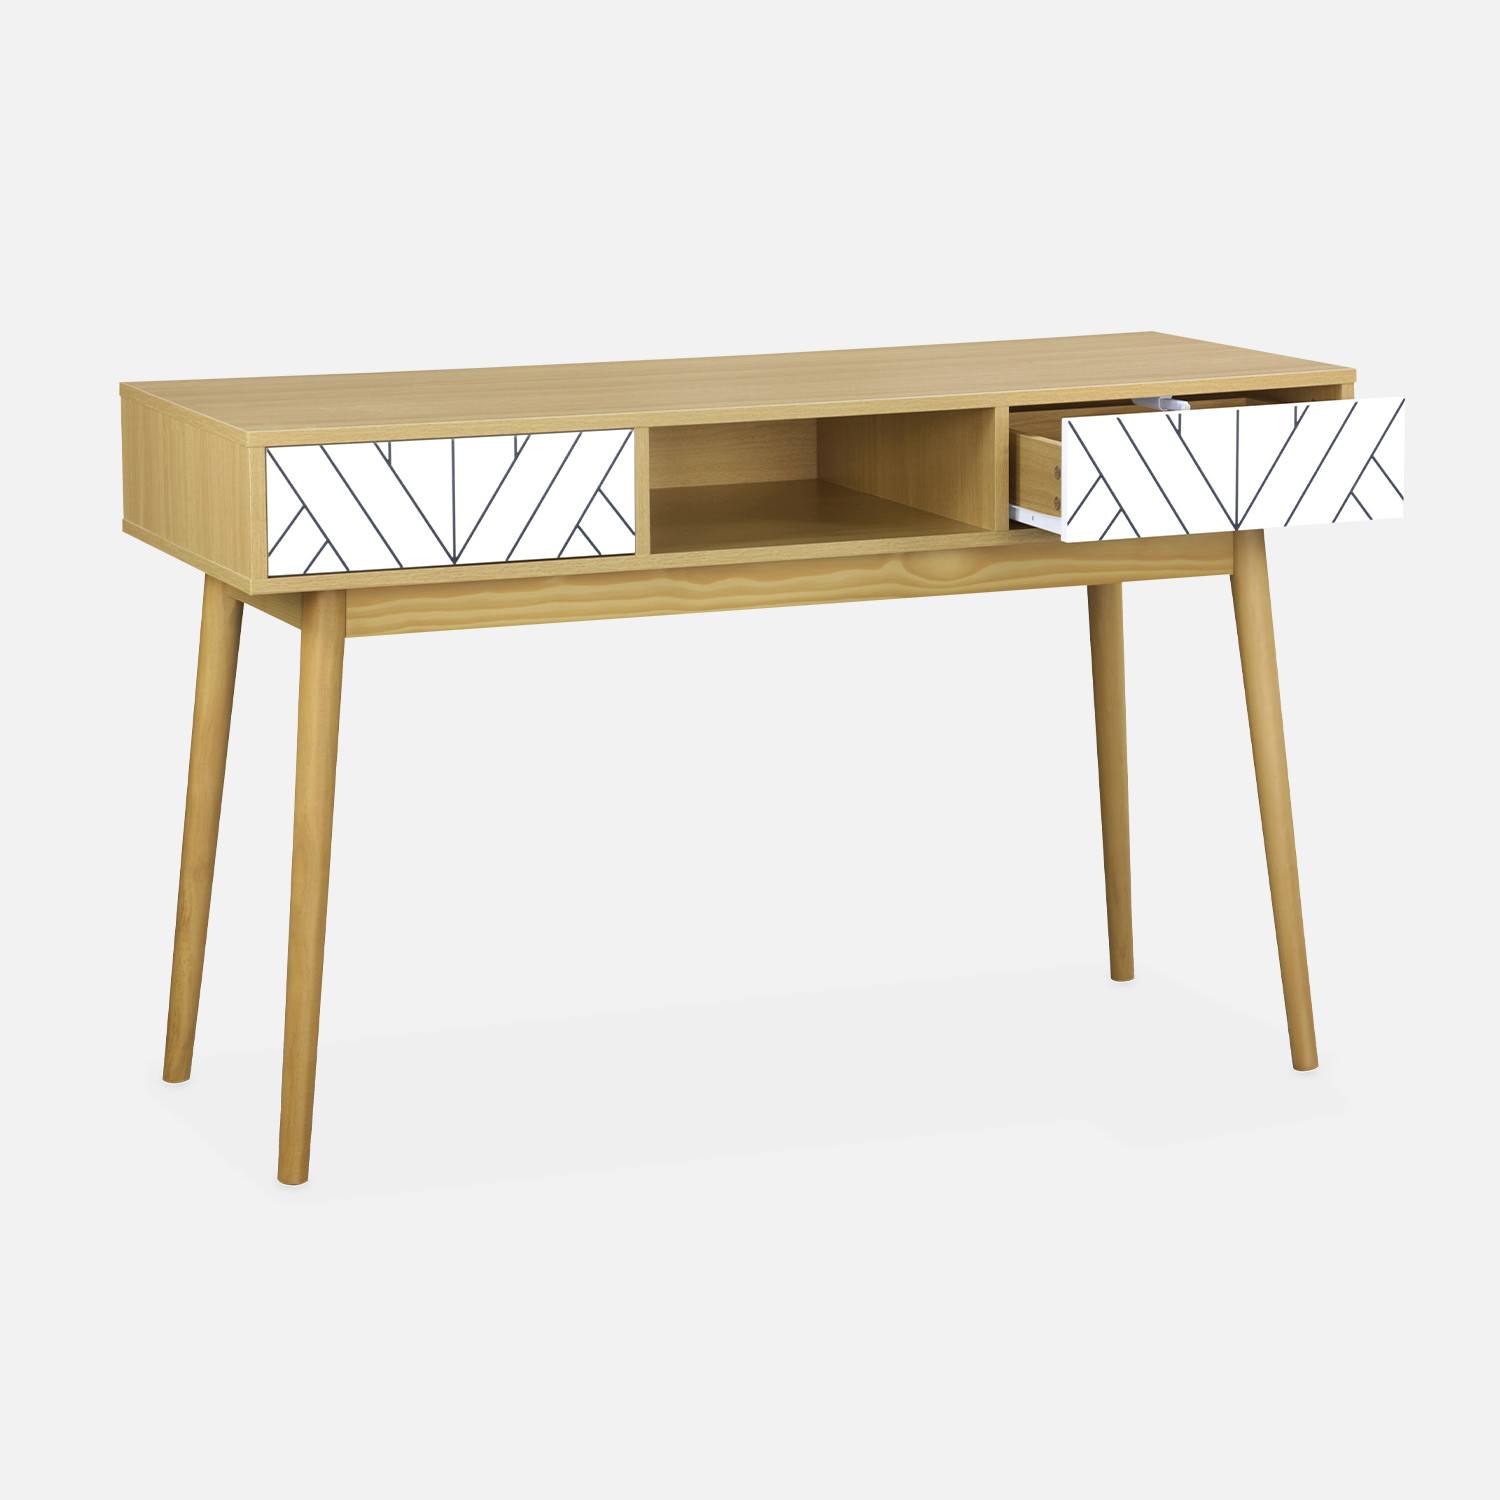 Wood-effect console table with two drawers and one storage nook, 120x48x75cm - Mika - White,sweeek,Photo6